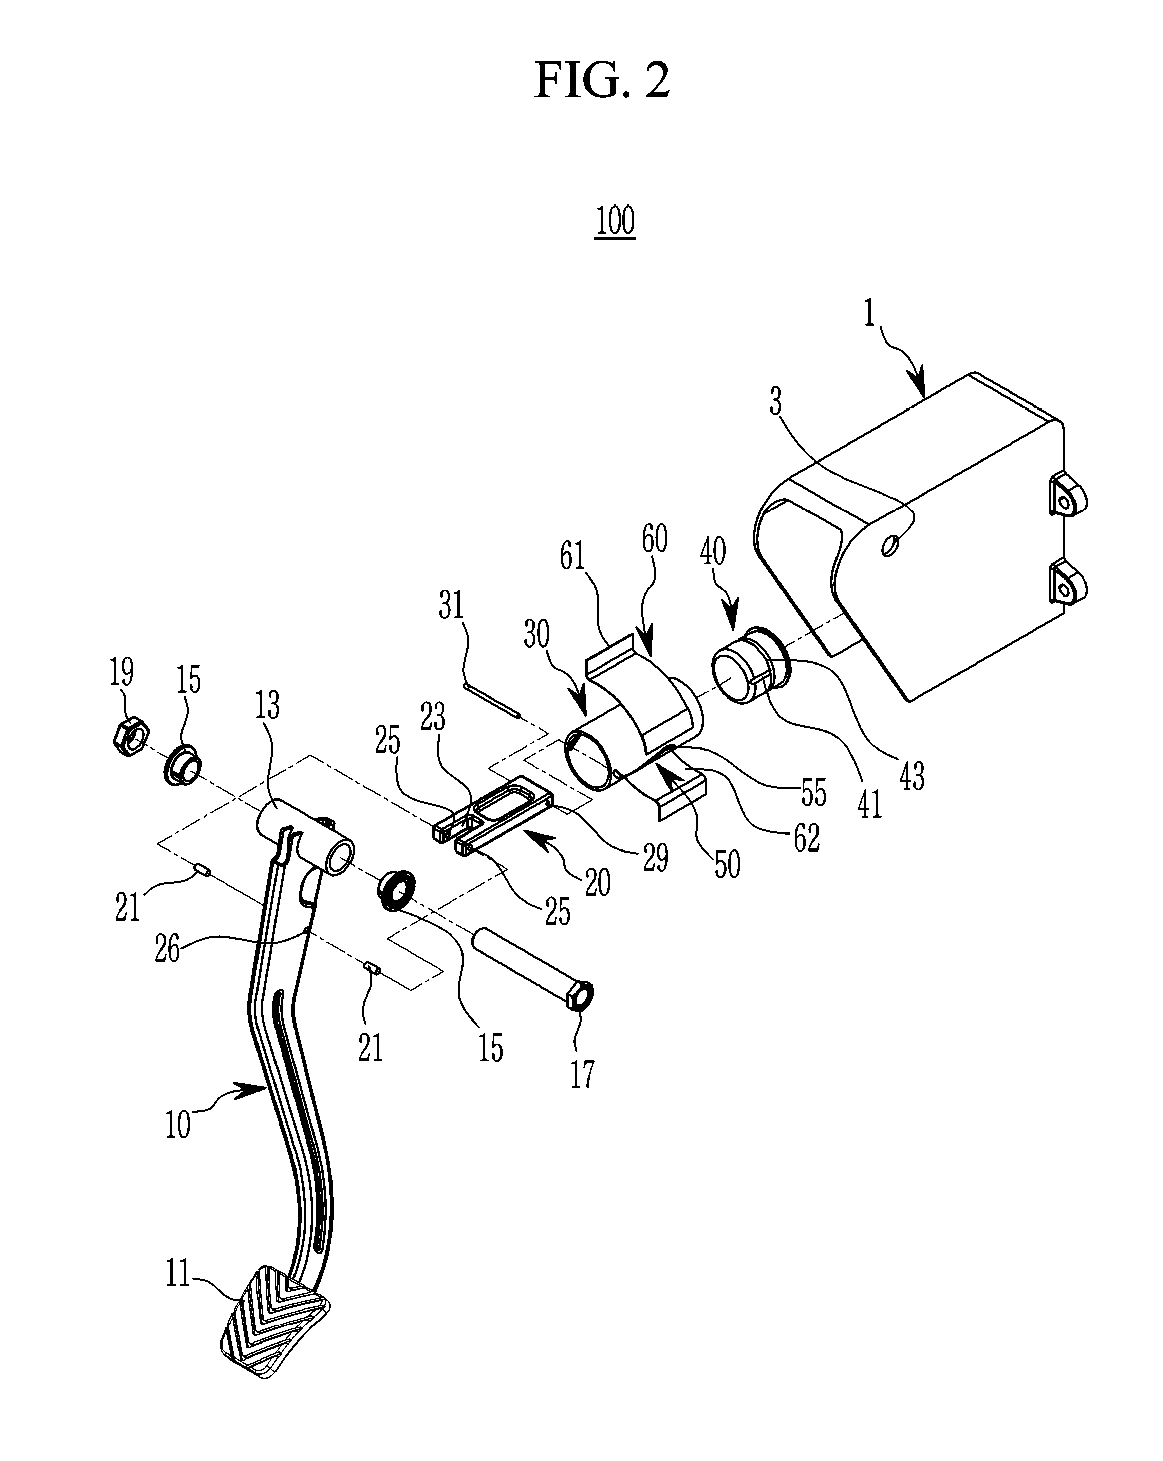 Pedal effort generation device for vehicle